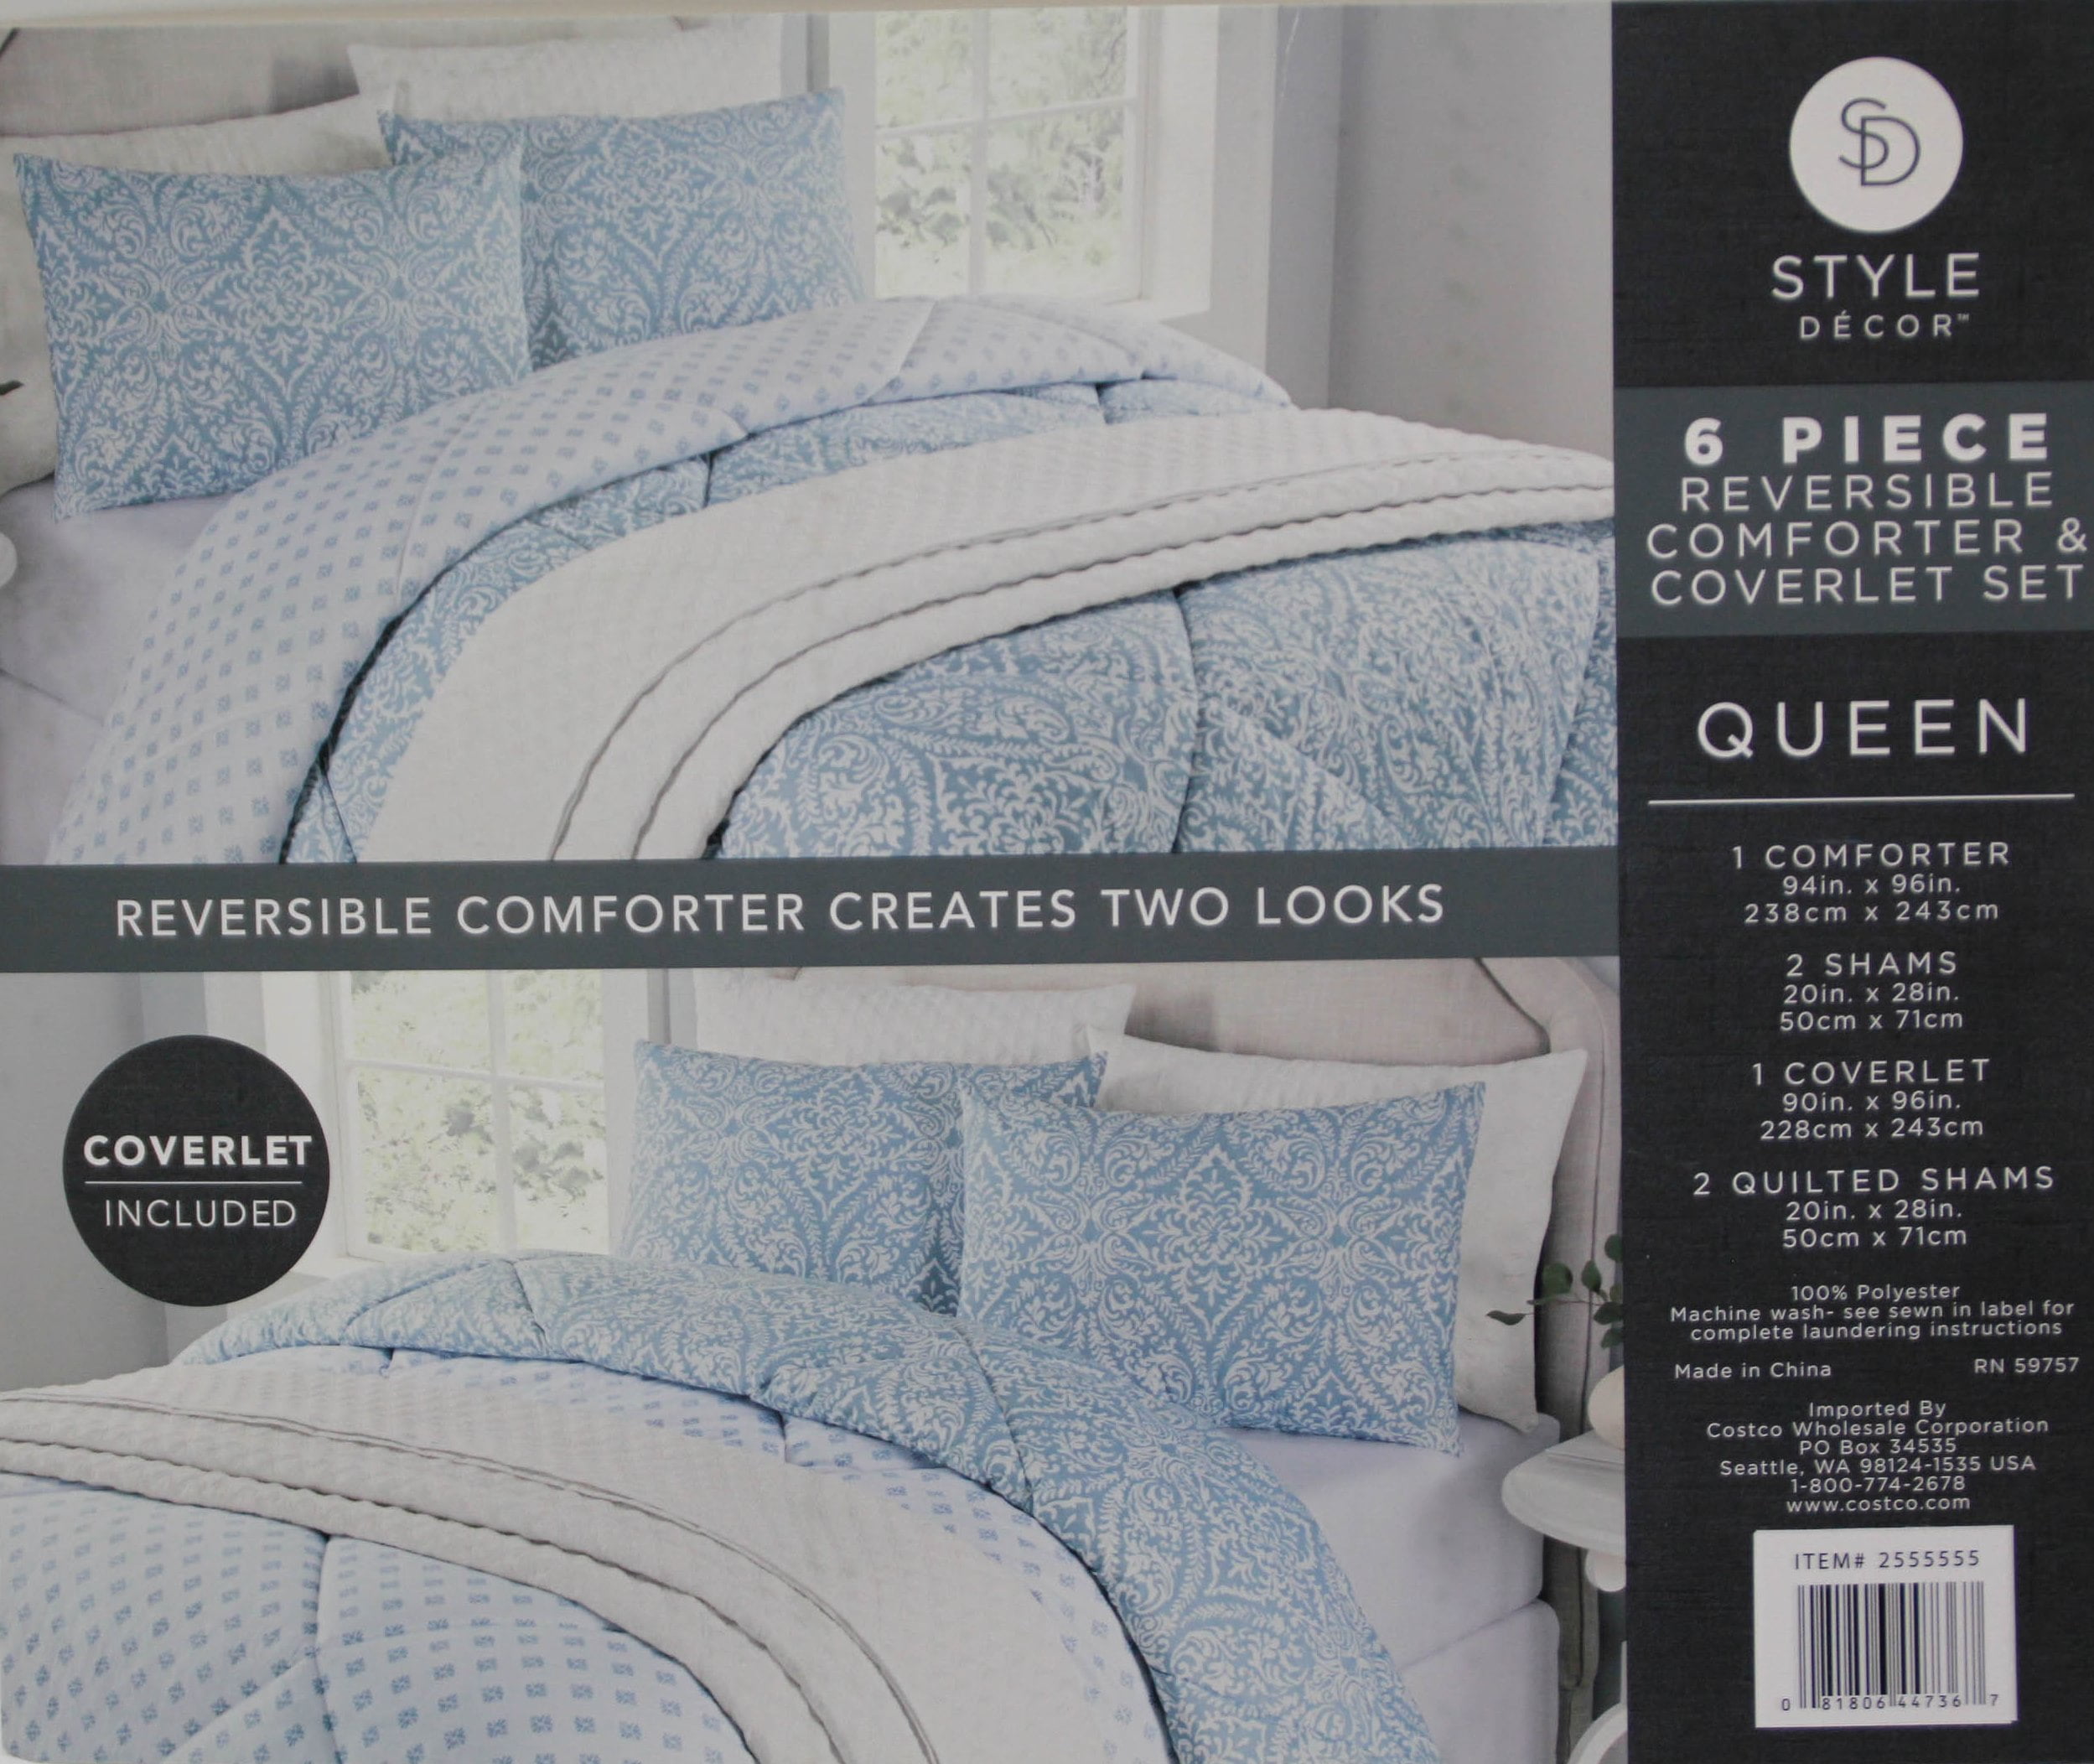 Style Decor 6 Piece Reversible Comforter And Coverlet Set Queen